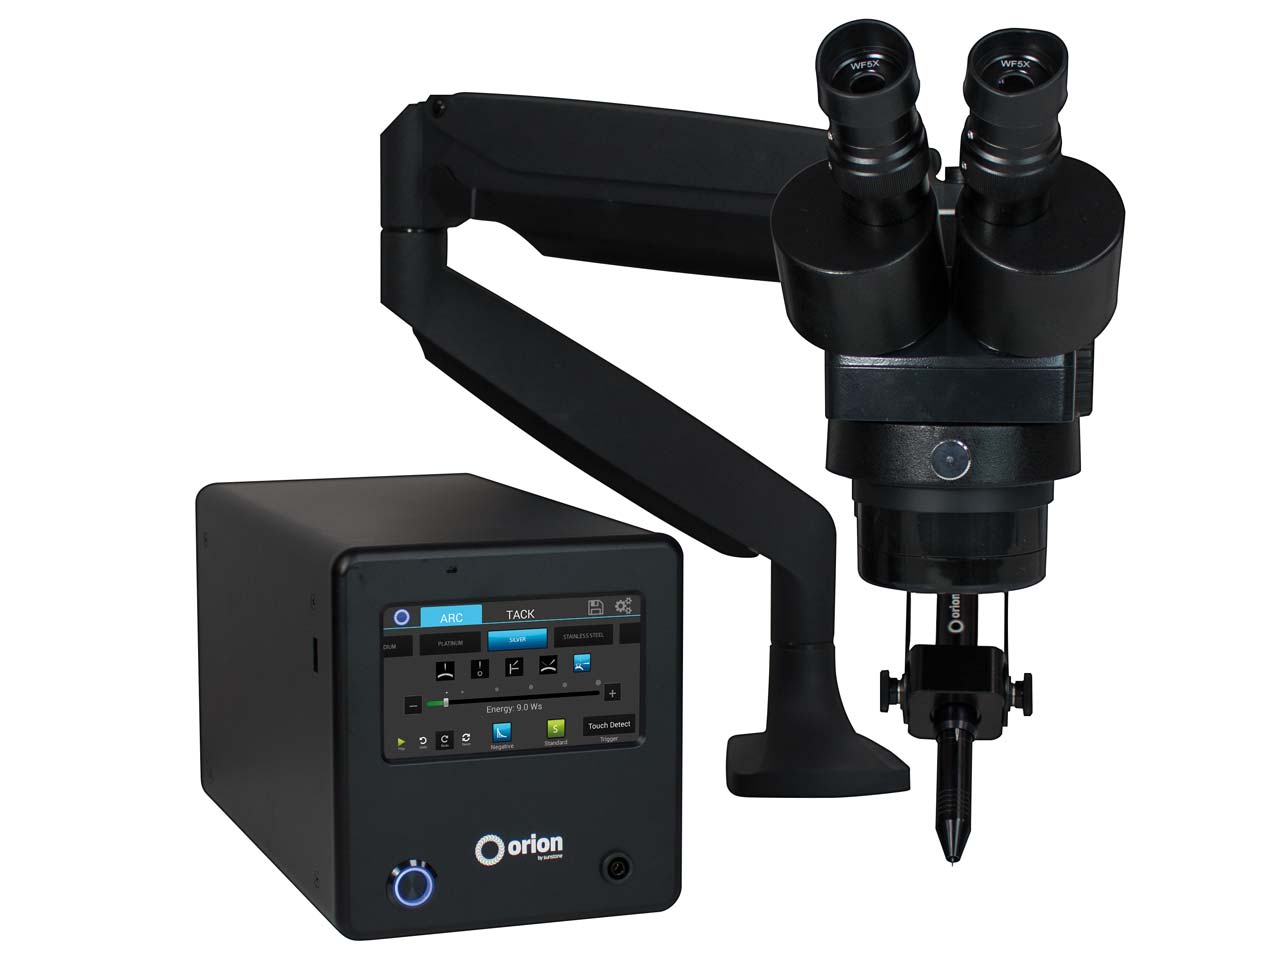 Orion 100c Pulse Welder With Microscope Questions & Answers